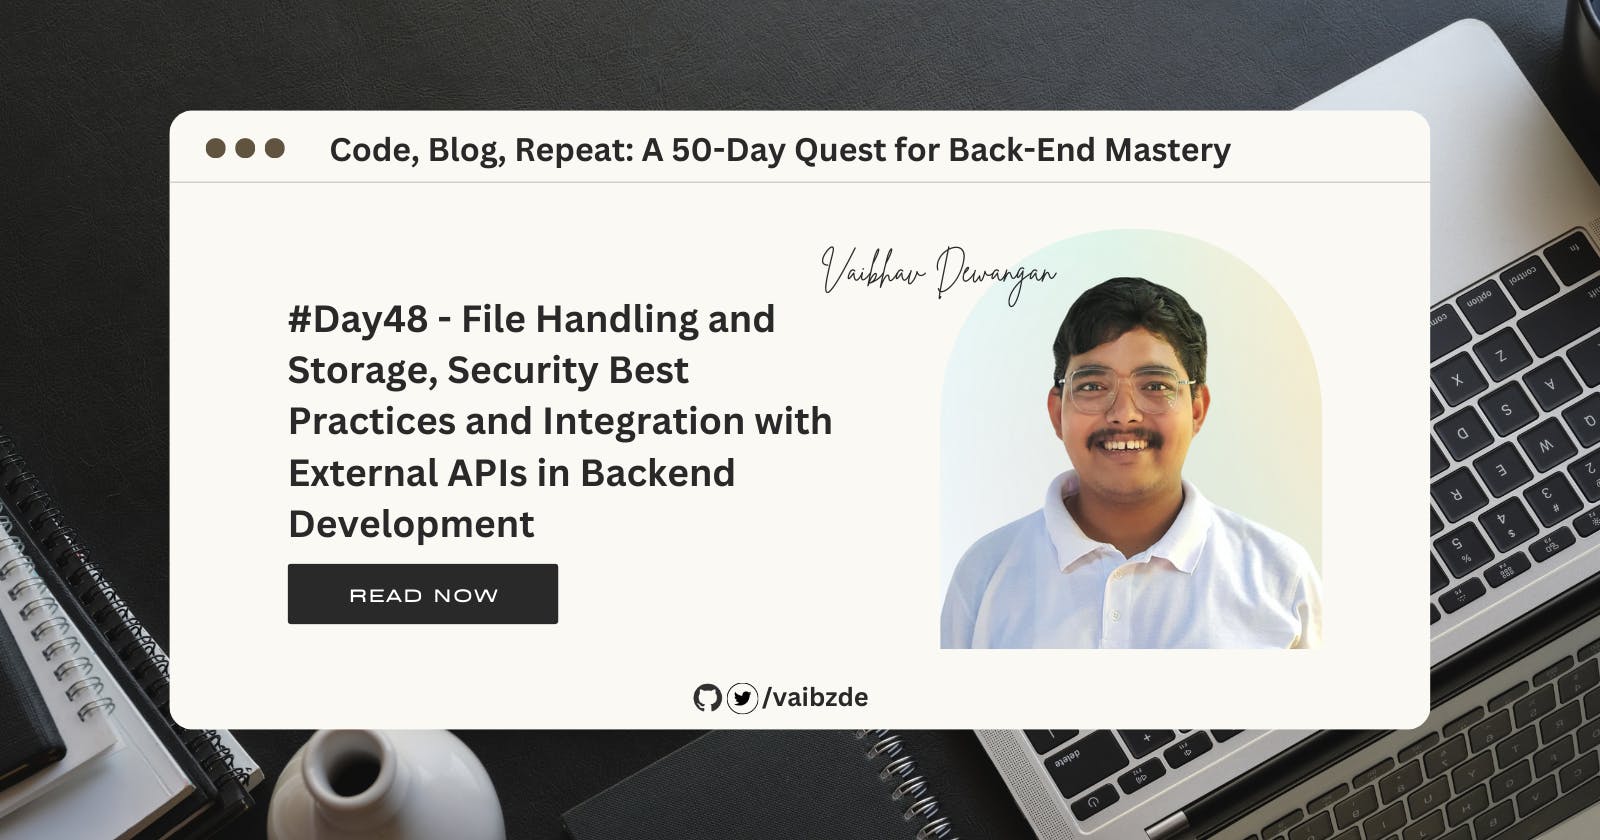 #Day48 - File Handling and Storage, Security Best Practices and Integration with External APIs in Backend Development